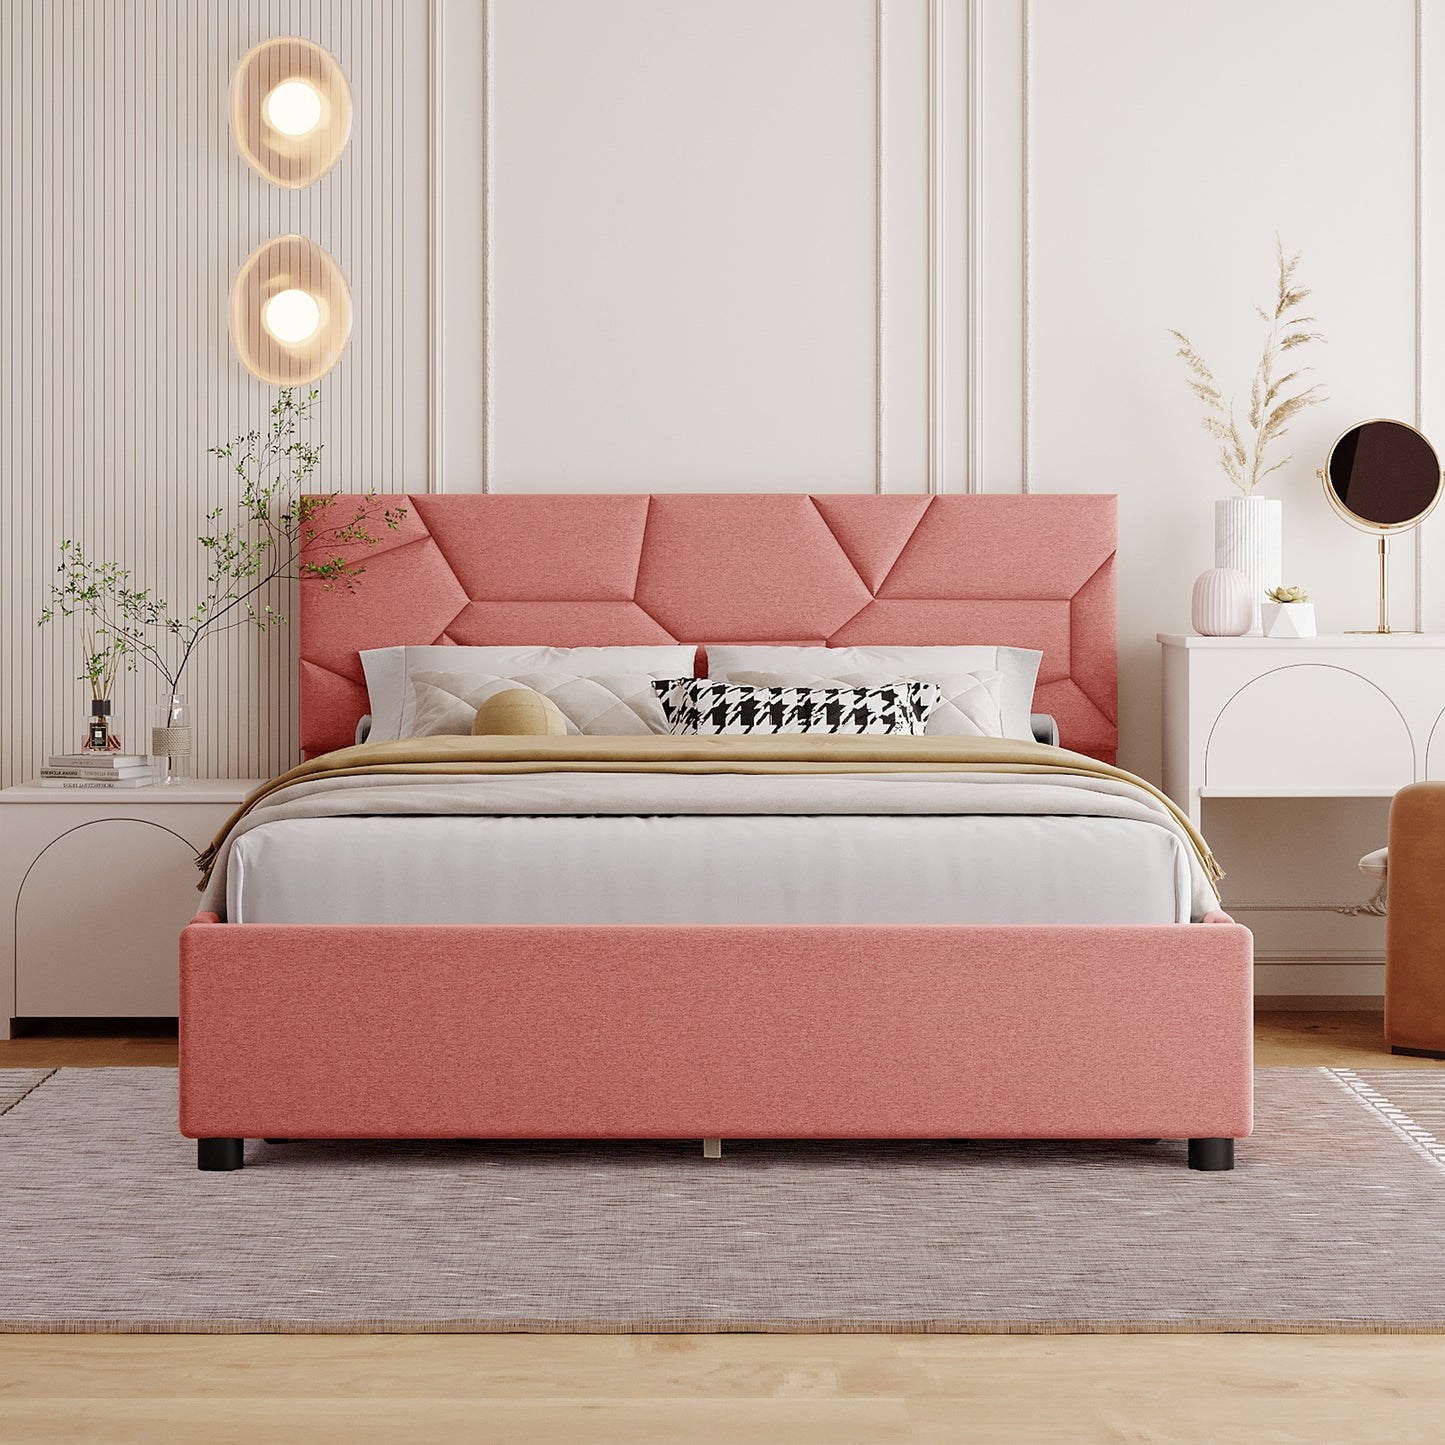 Full Size Storage Bed with 4 Drawers, BTMWAY Full Size Upholstered Platform Bed with Headboard Brick Pattern for Bedroom, Contemporary Storage Full Bed Frame 4 Storage Drawers Bed, Pink